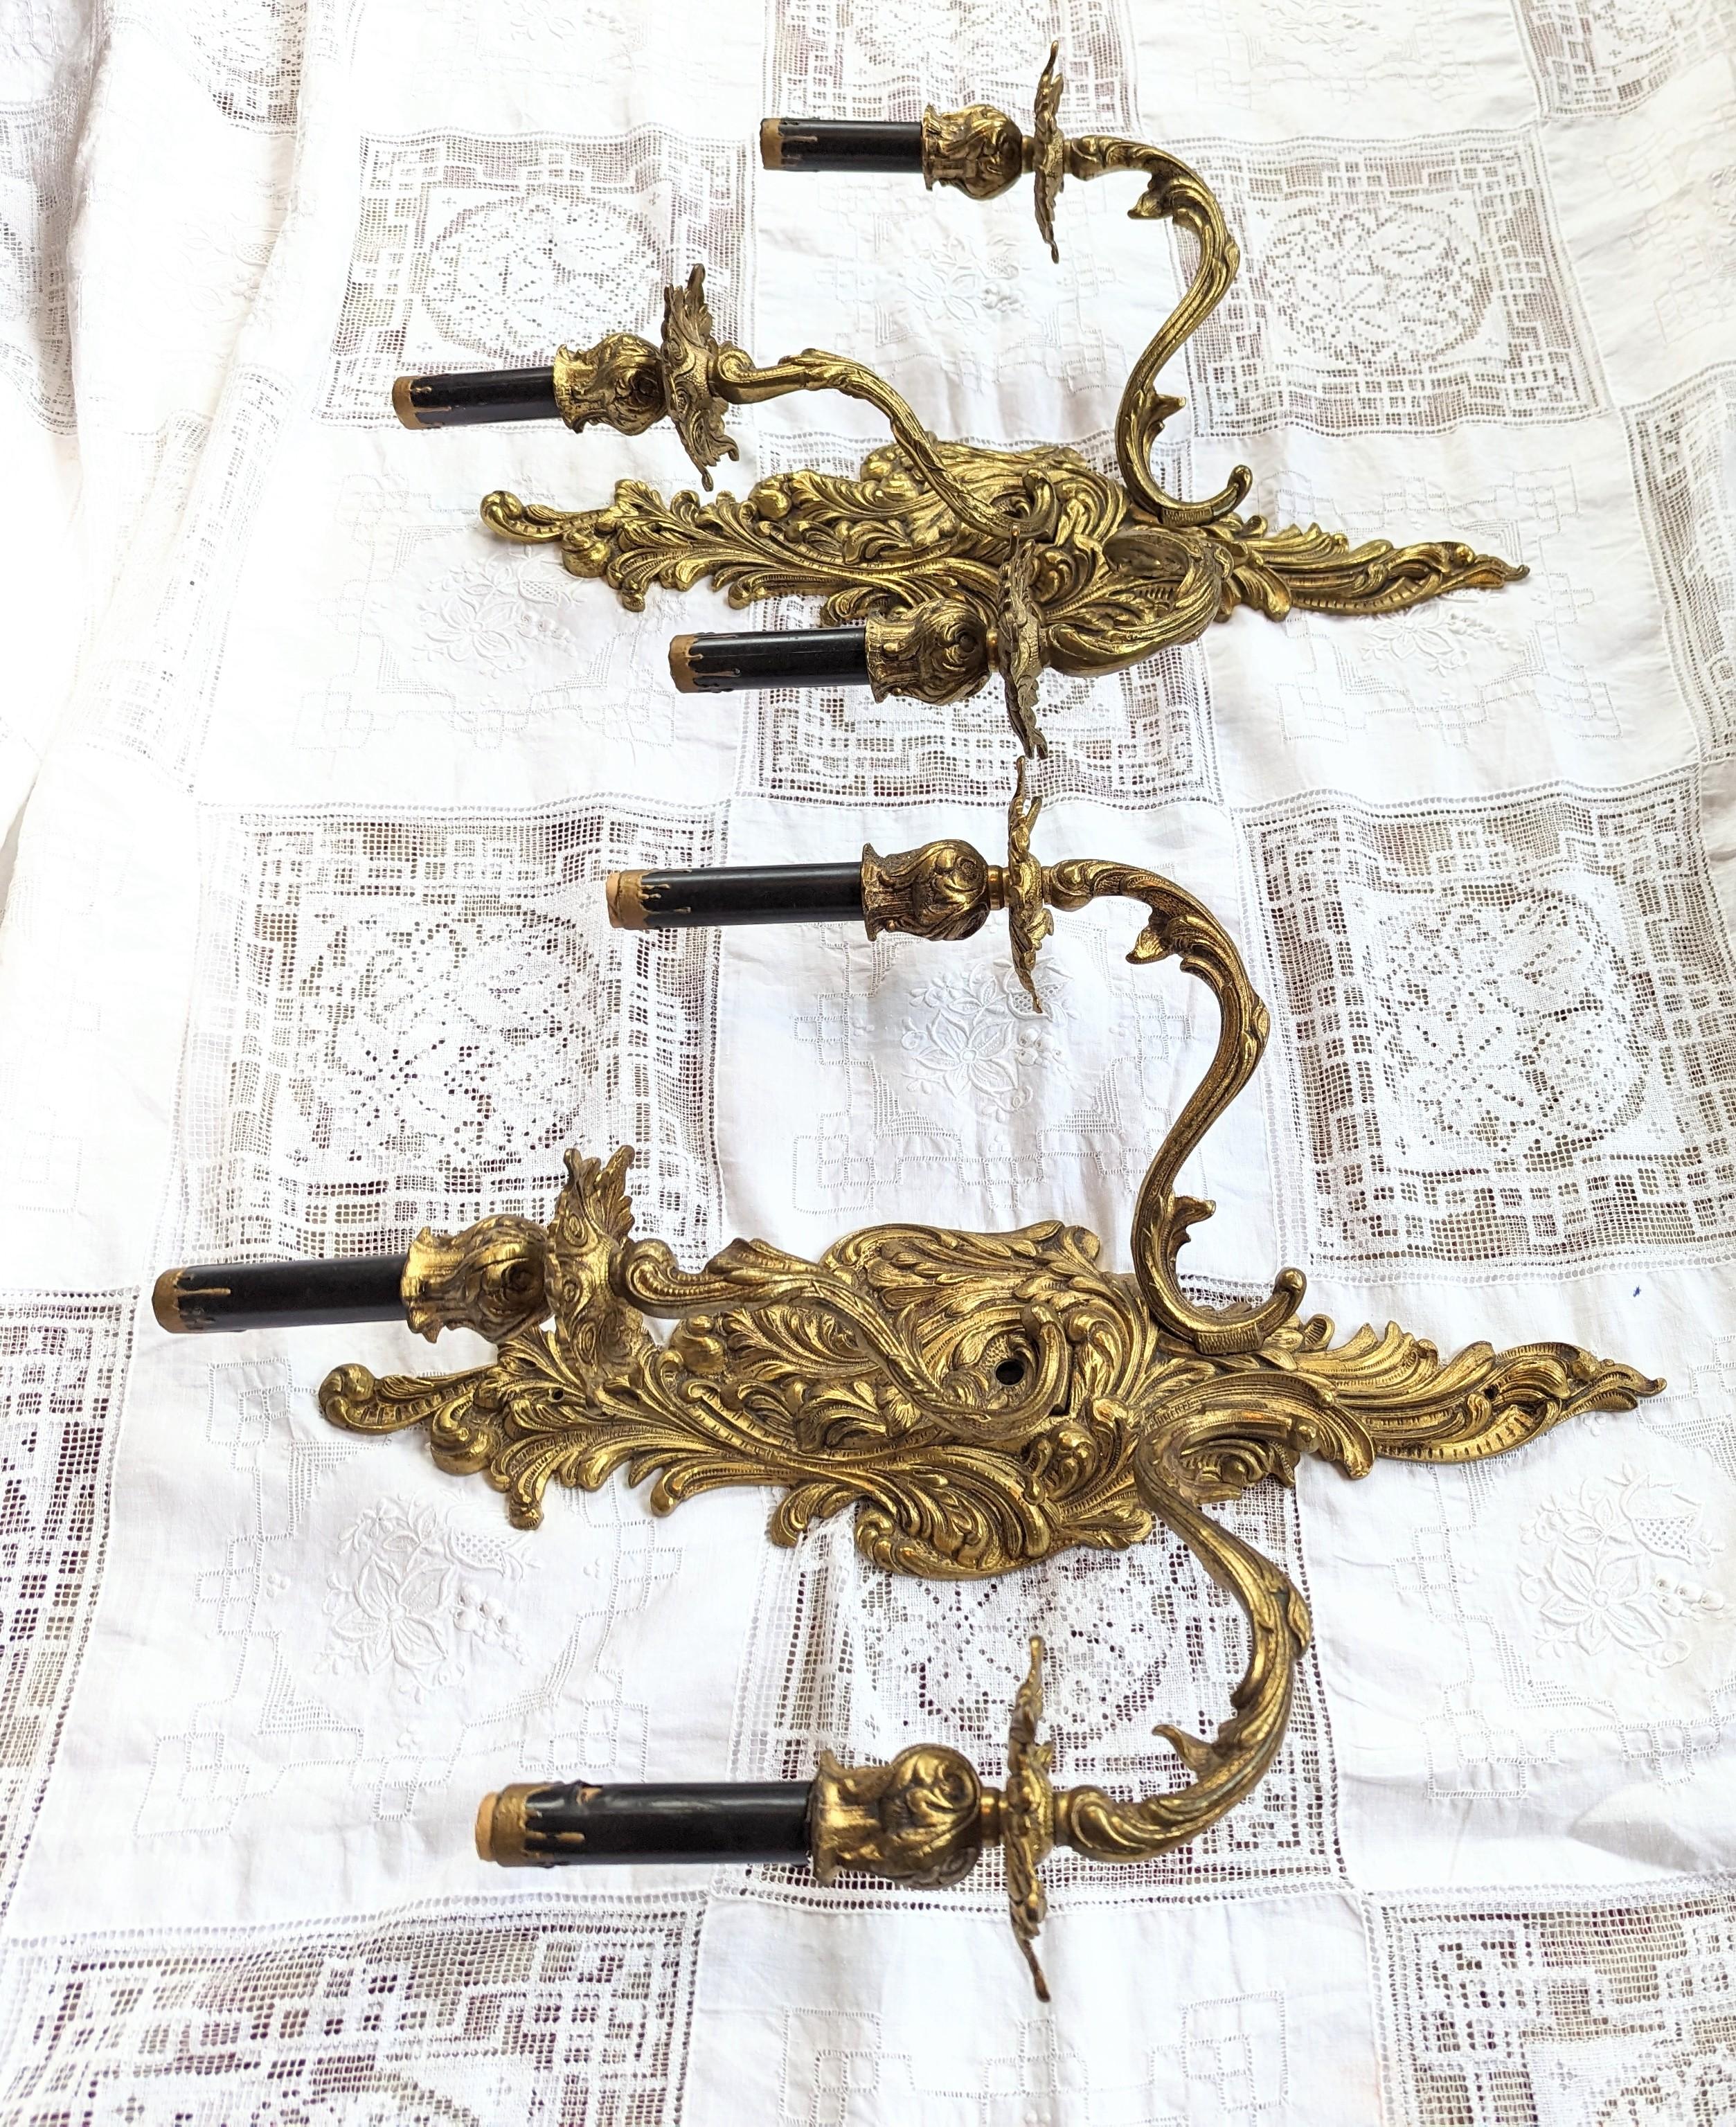 Rococo Revival Pair of Antique French Gilded Sconces - 3 Light Armed Sconce European For Sale